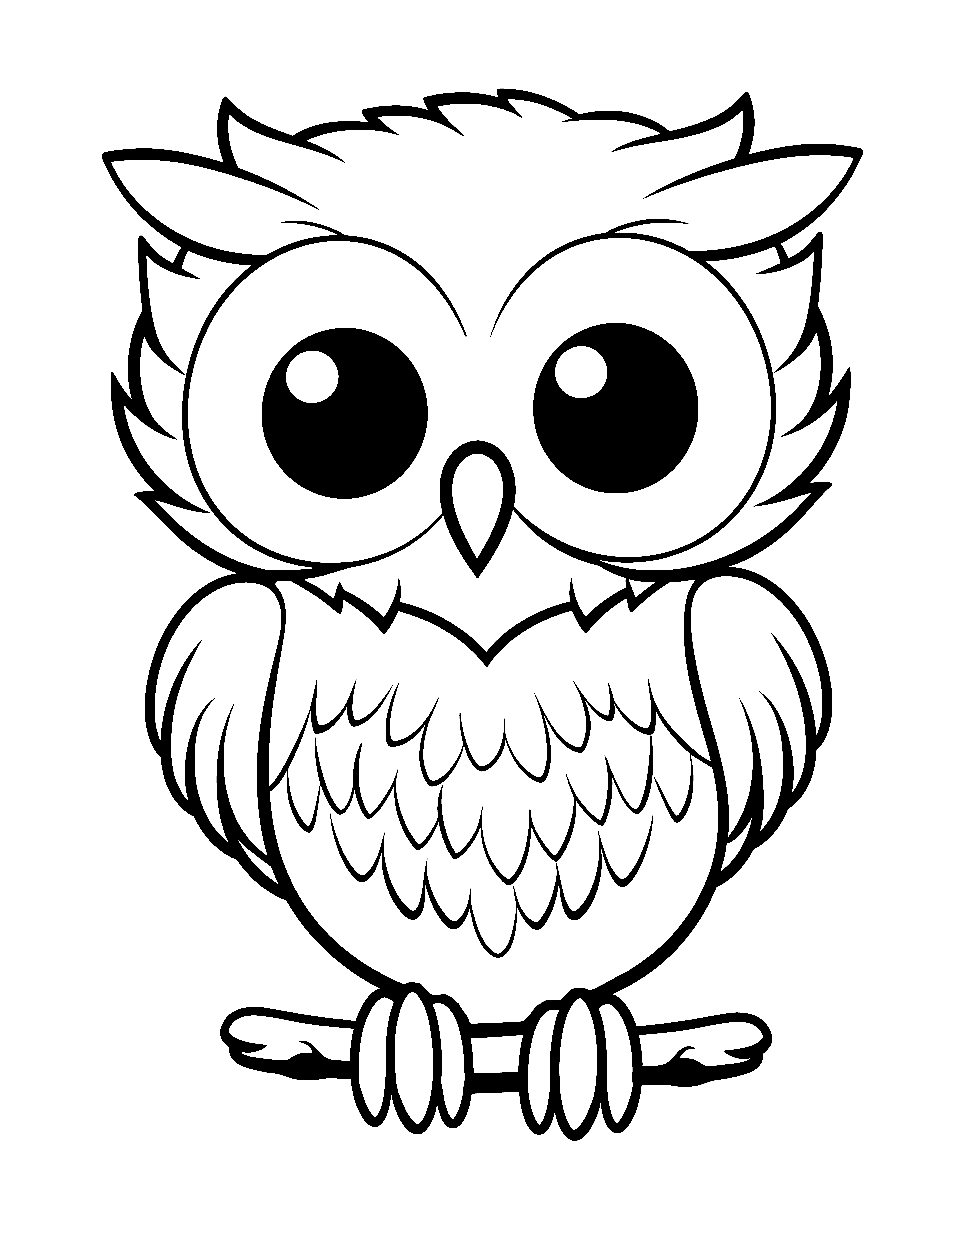 Cute Baby Owl Coloring Page - A fluffy baby owl sitting on a branch with wide, curious eyes.